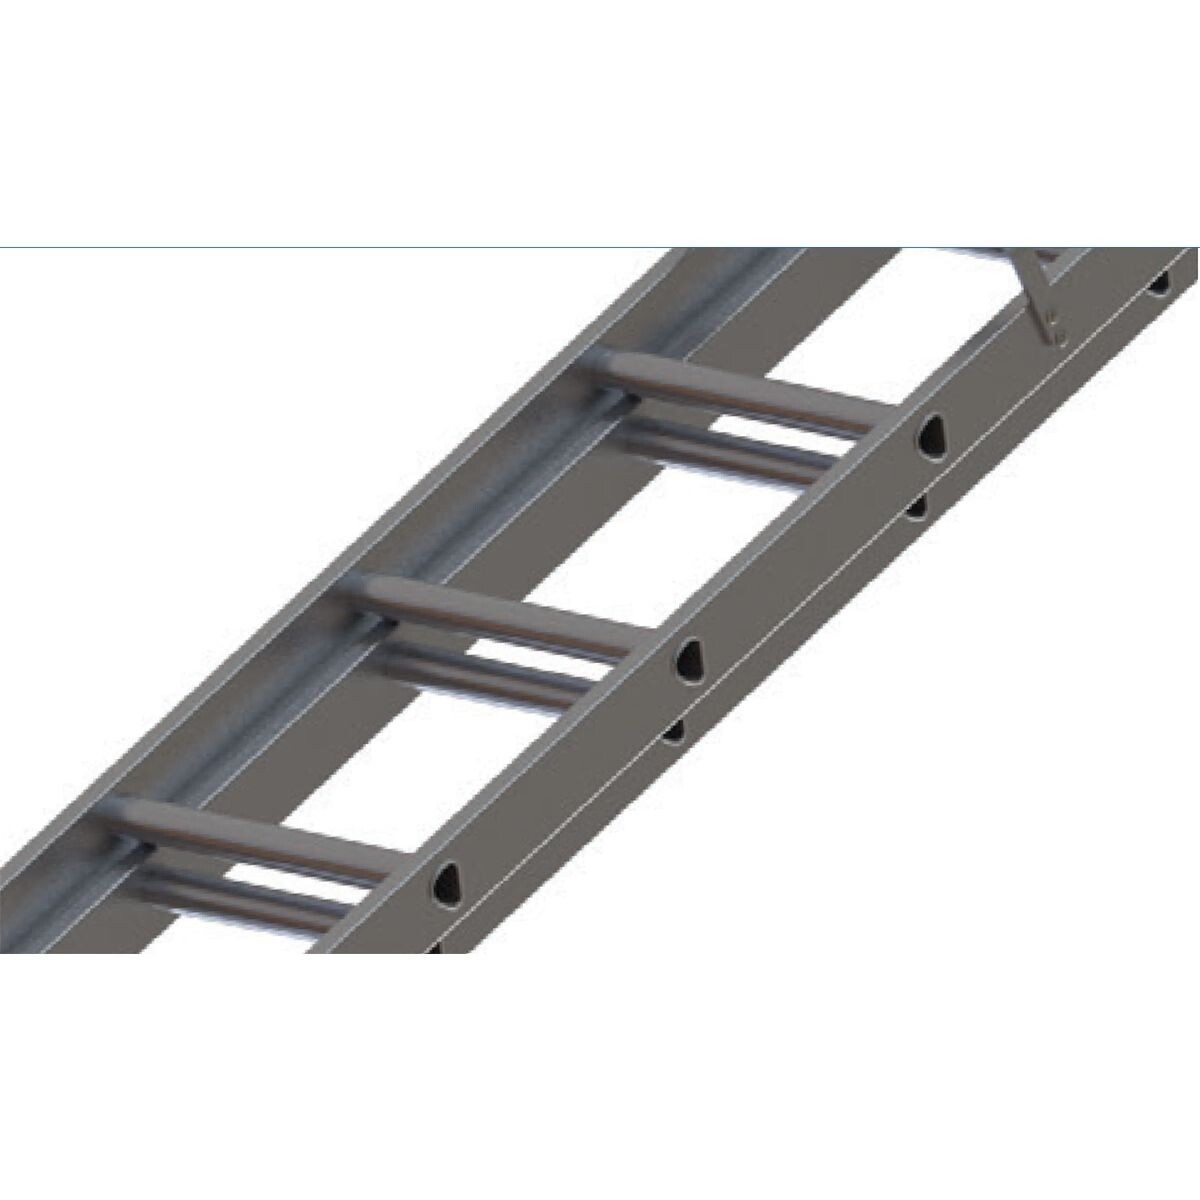 Double Section Extendable Roof Ladder Closed 4.33 Extends to 7.13m